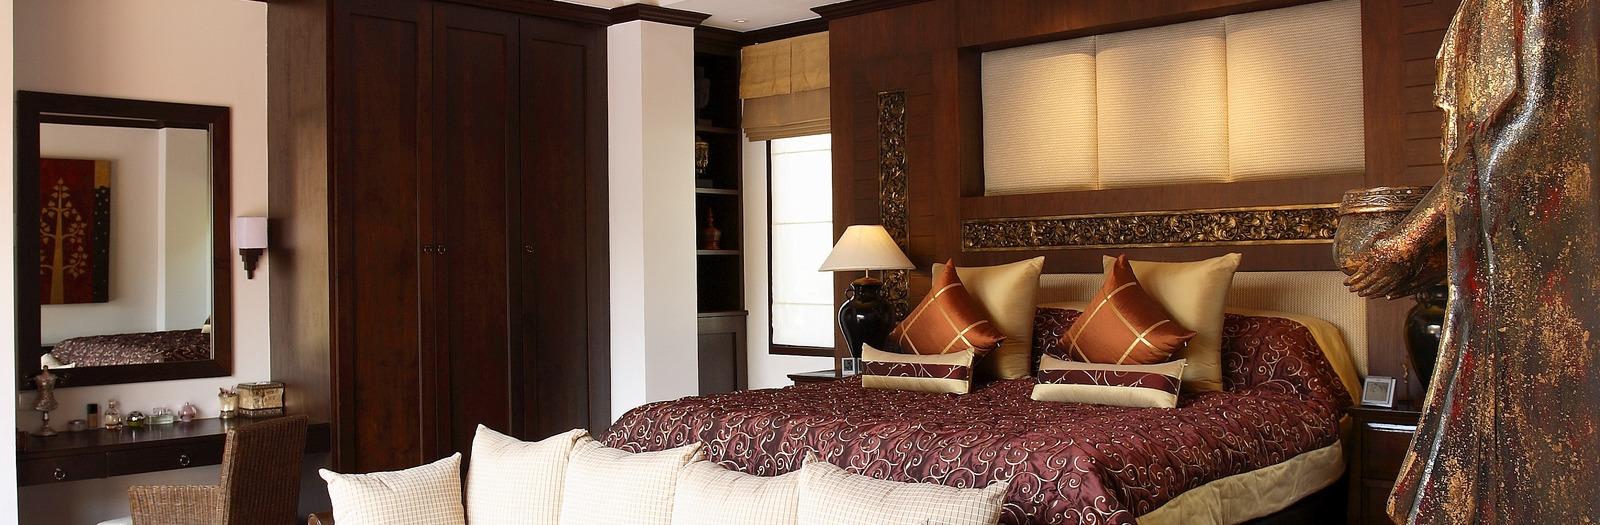 Asian Bedroom with large dark cherry wood ceiling beams